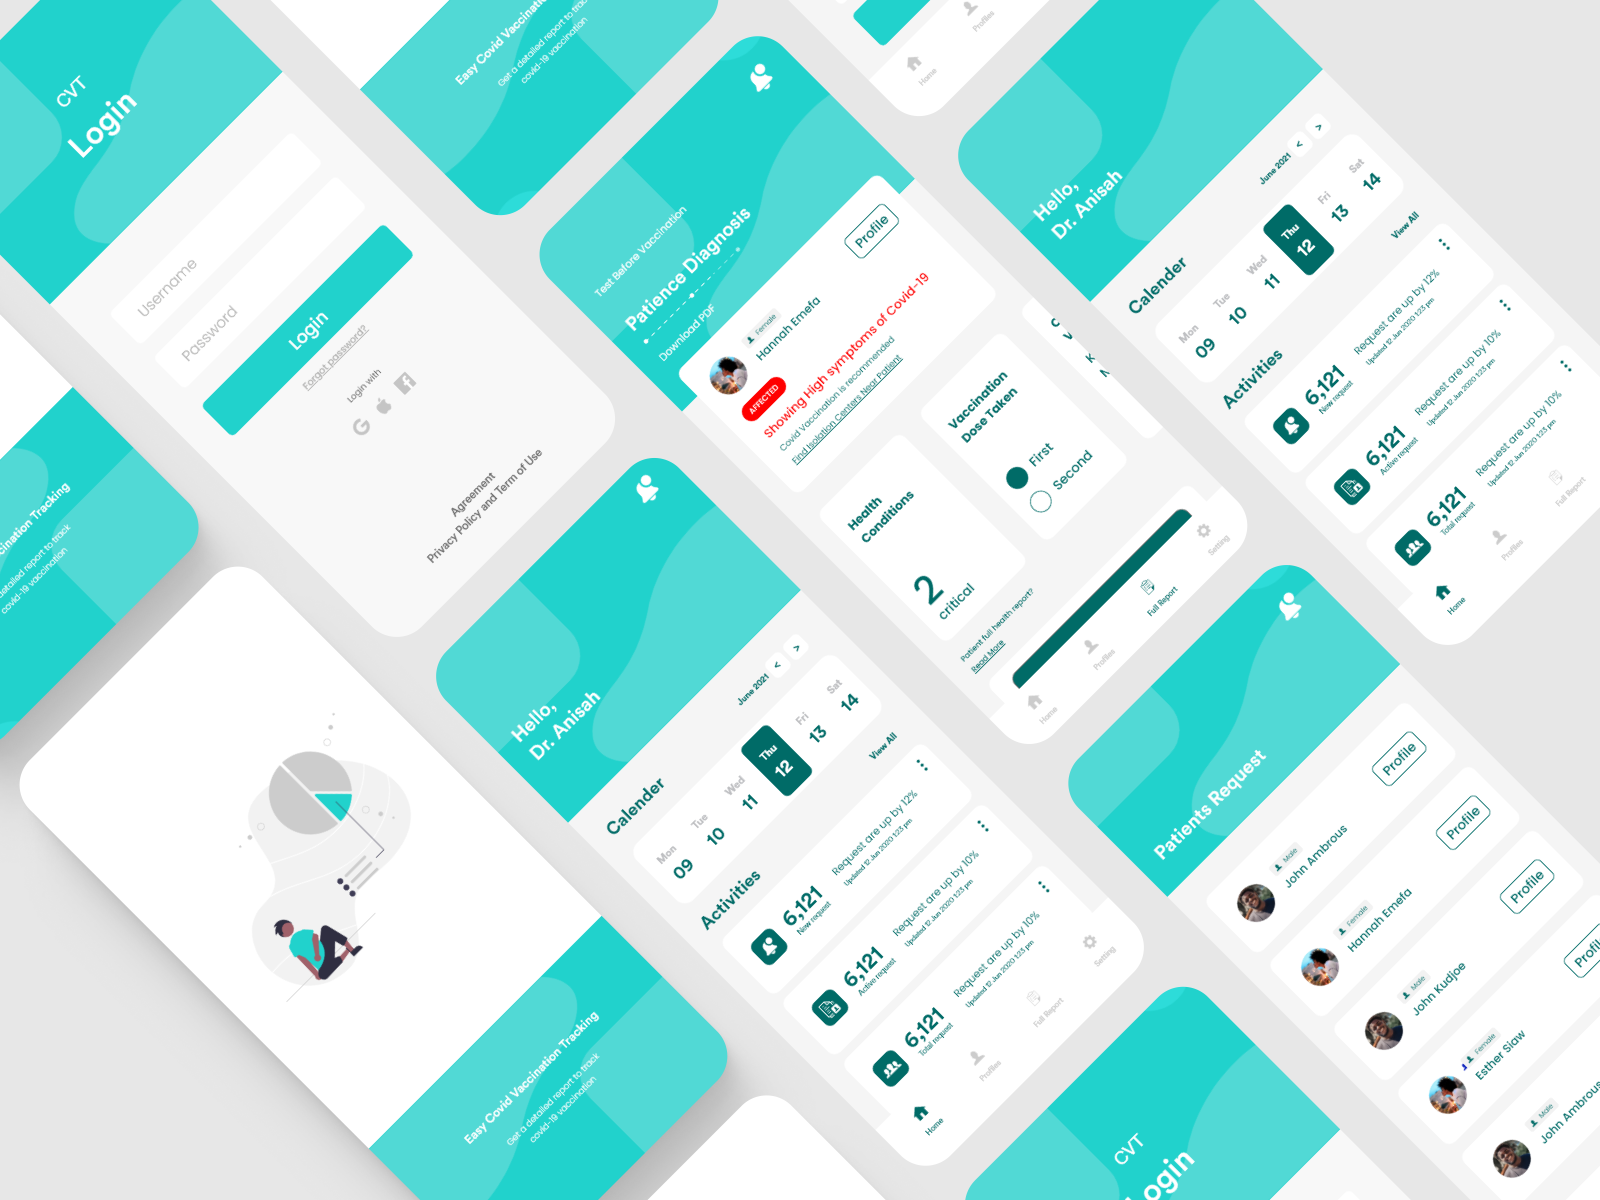 Covid Vaccination Tracking App by Kwabena Stephen on Dribbble